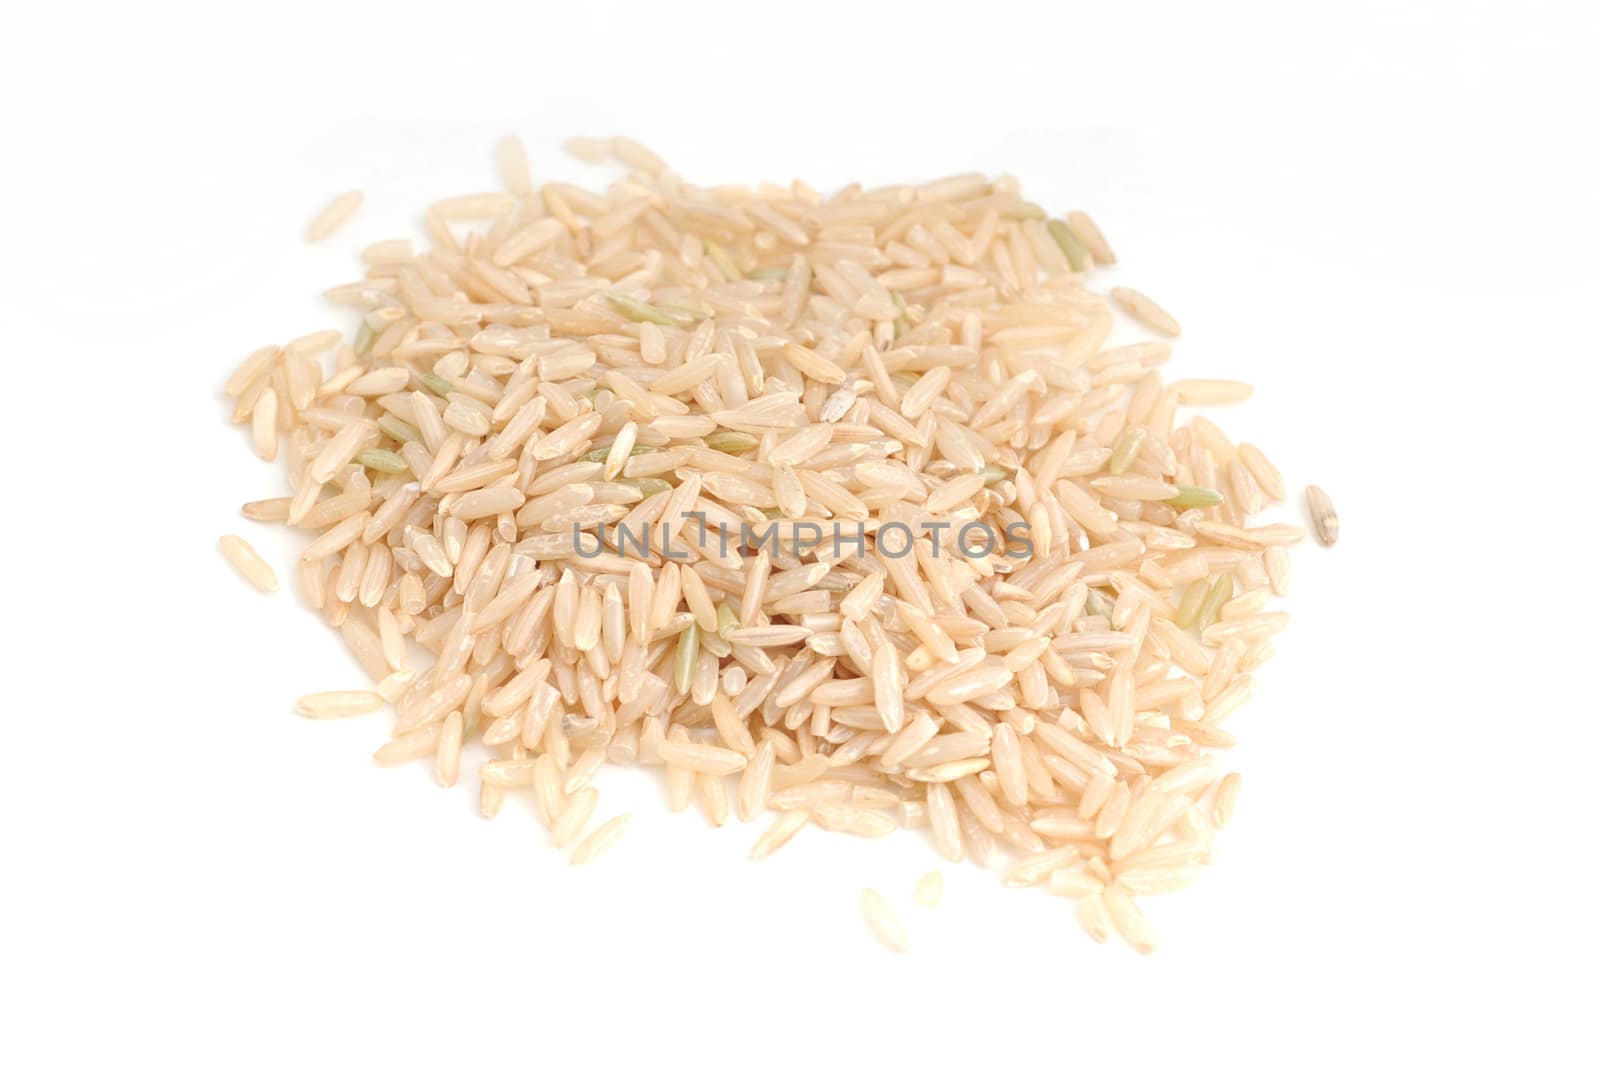 Brown Rice which is a whole grain on a white background